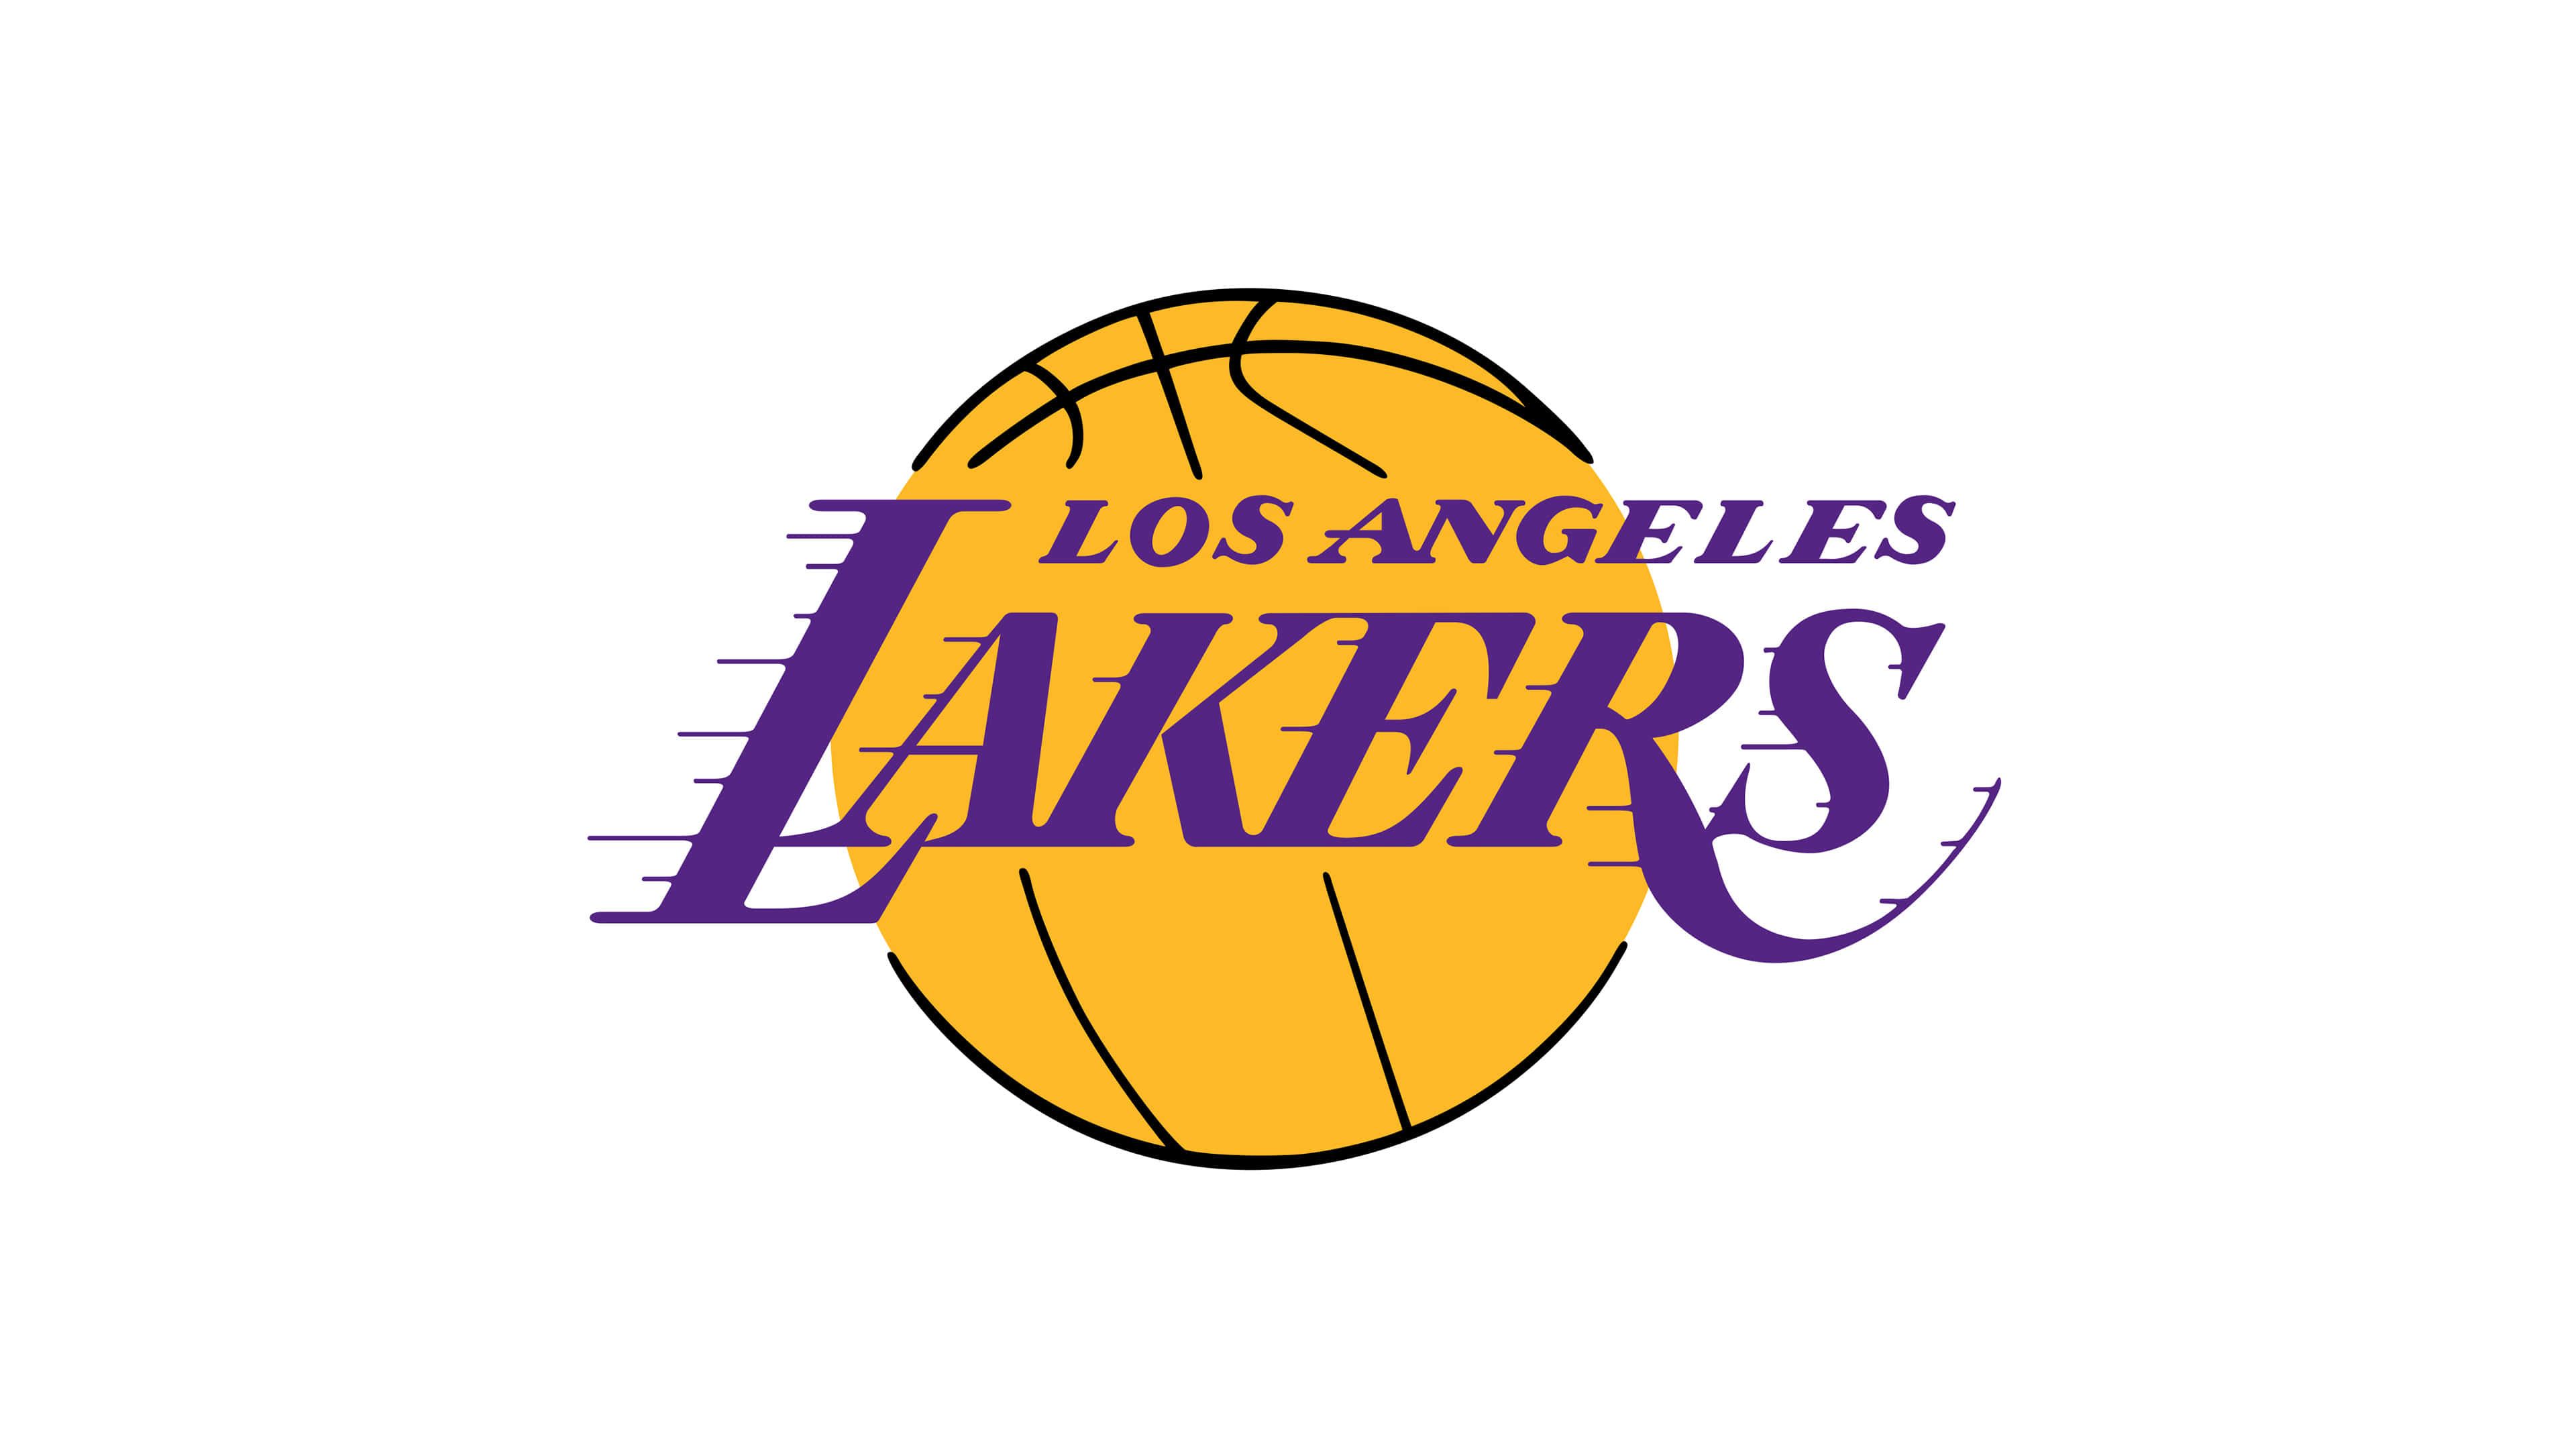 Los Angeles Lakers Wallpapers - Top 35 Best NBA Lakers Backgrounds [ 2021 ]